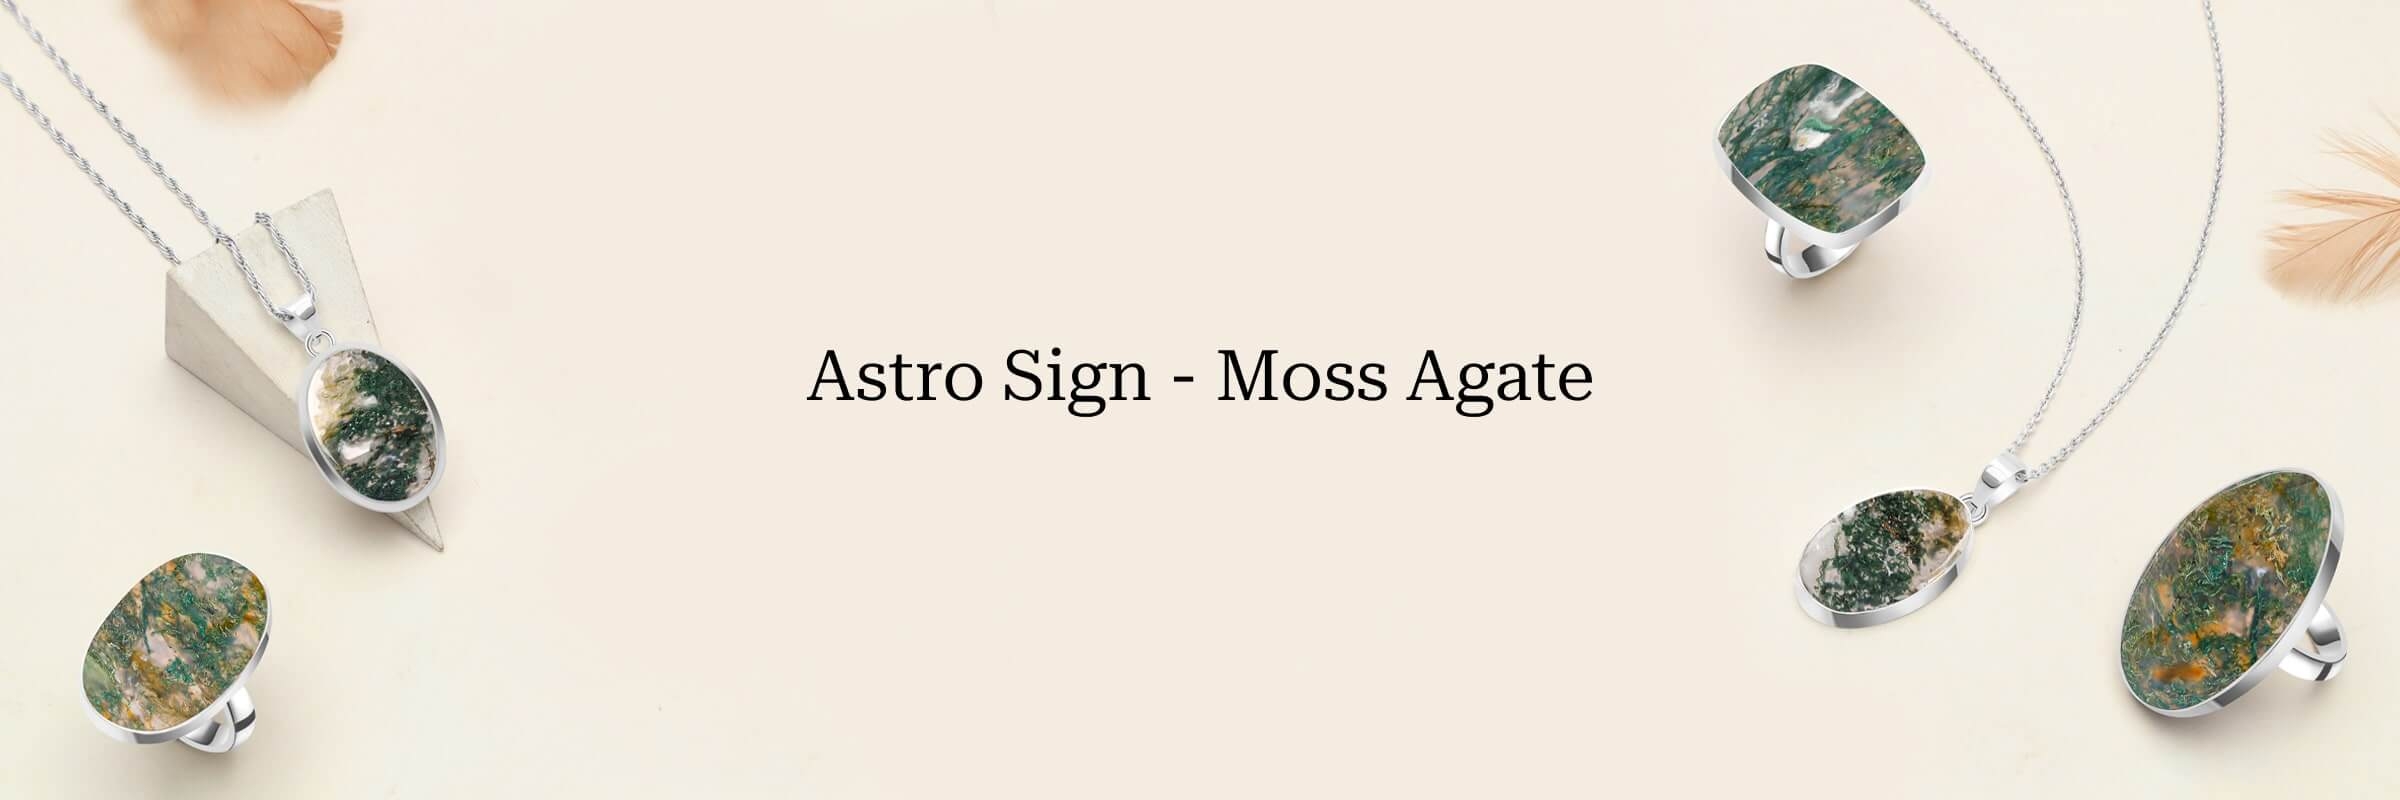 Moss Agate is the Birthstone of Which Zodiac Sign